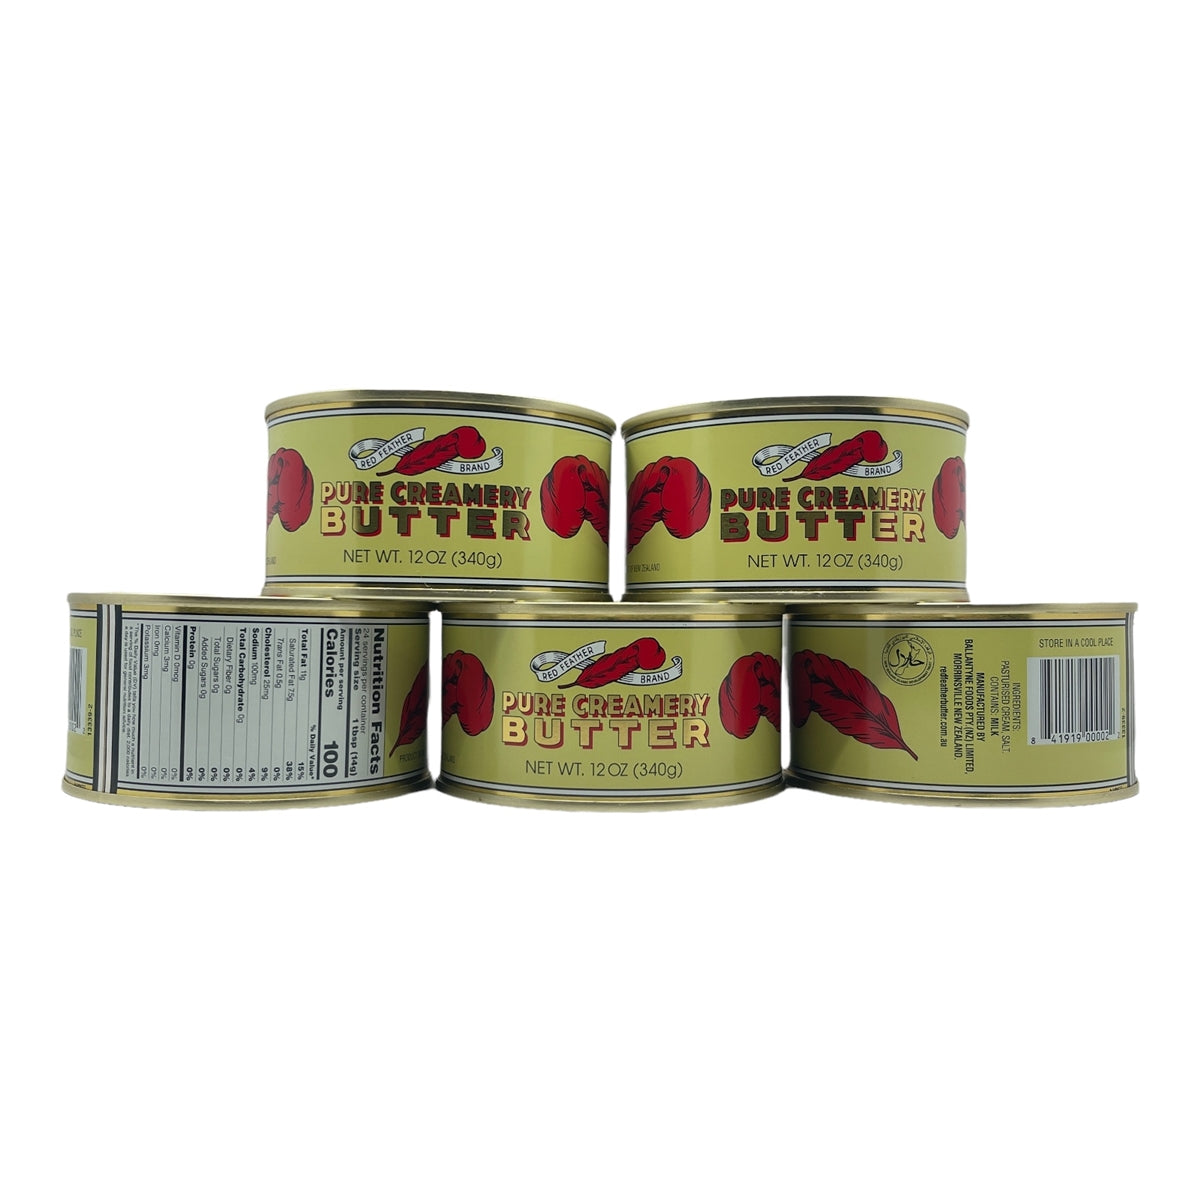 Red Feather Real Canned Butter from New Zealand